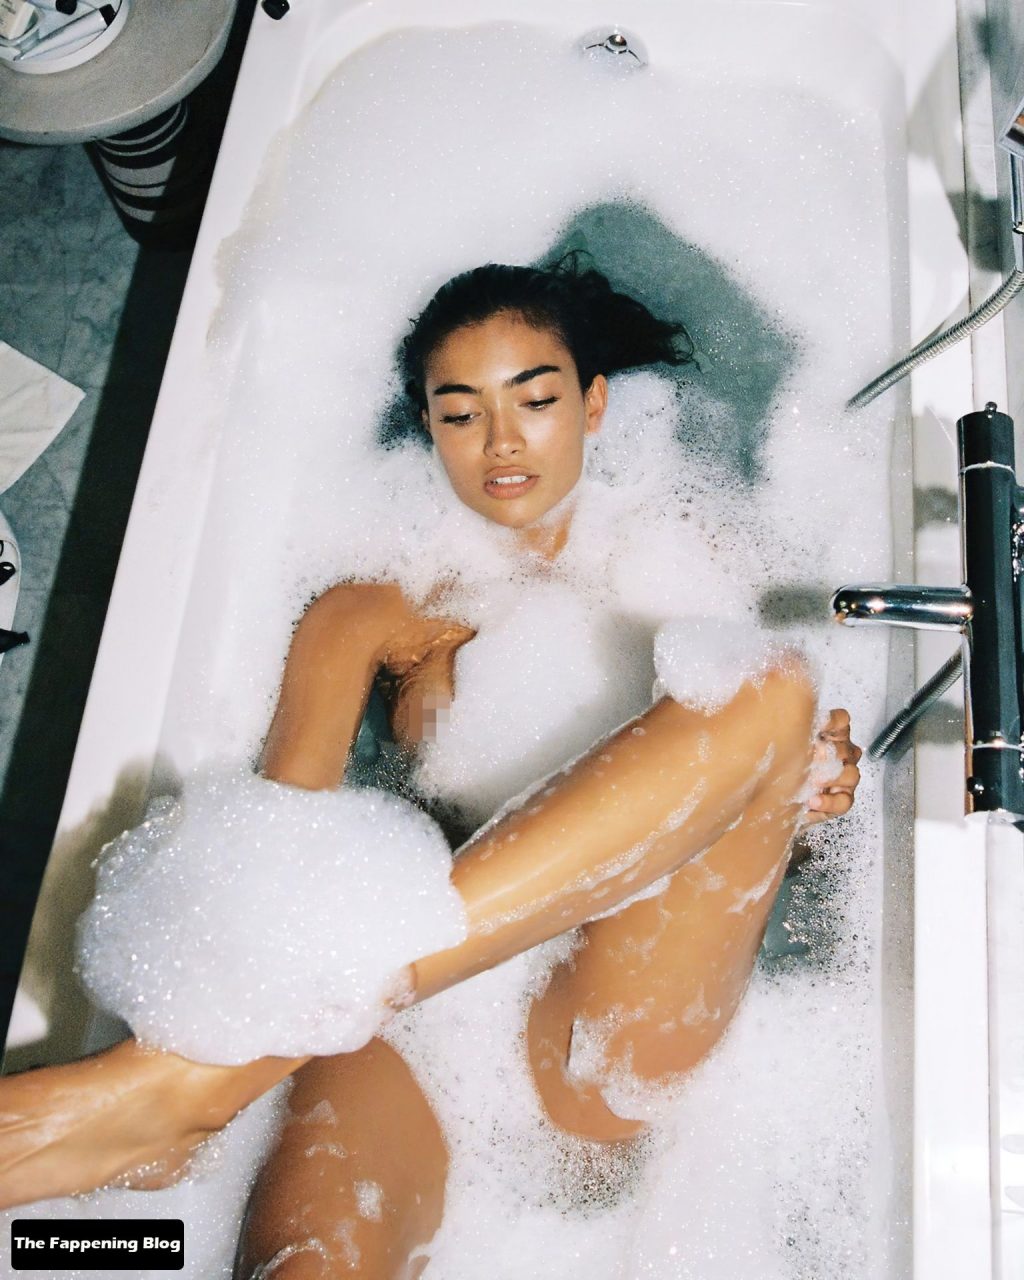 Kelly Gale Poses Naked in the Bathroom (7 Photos)